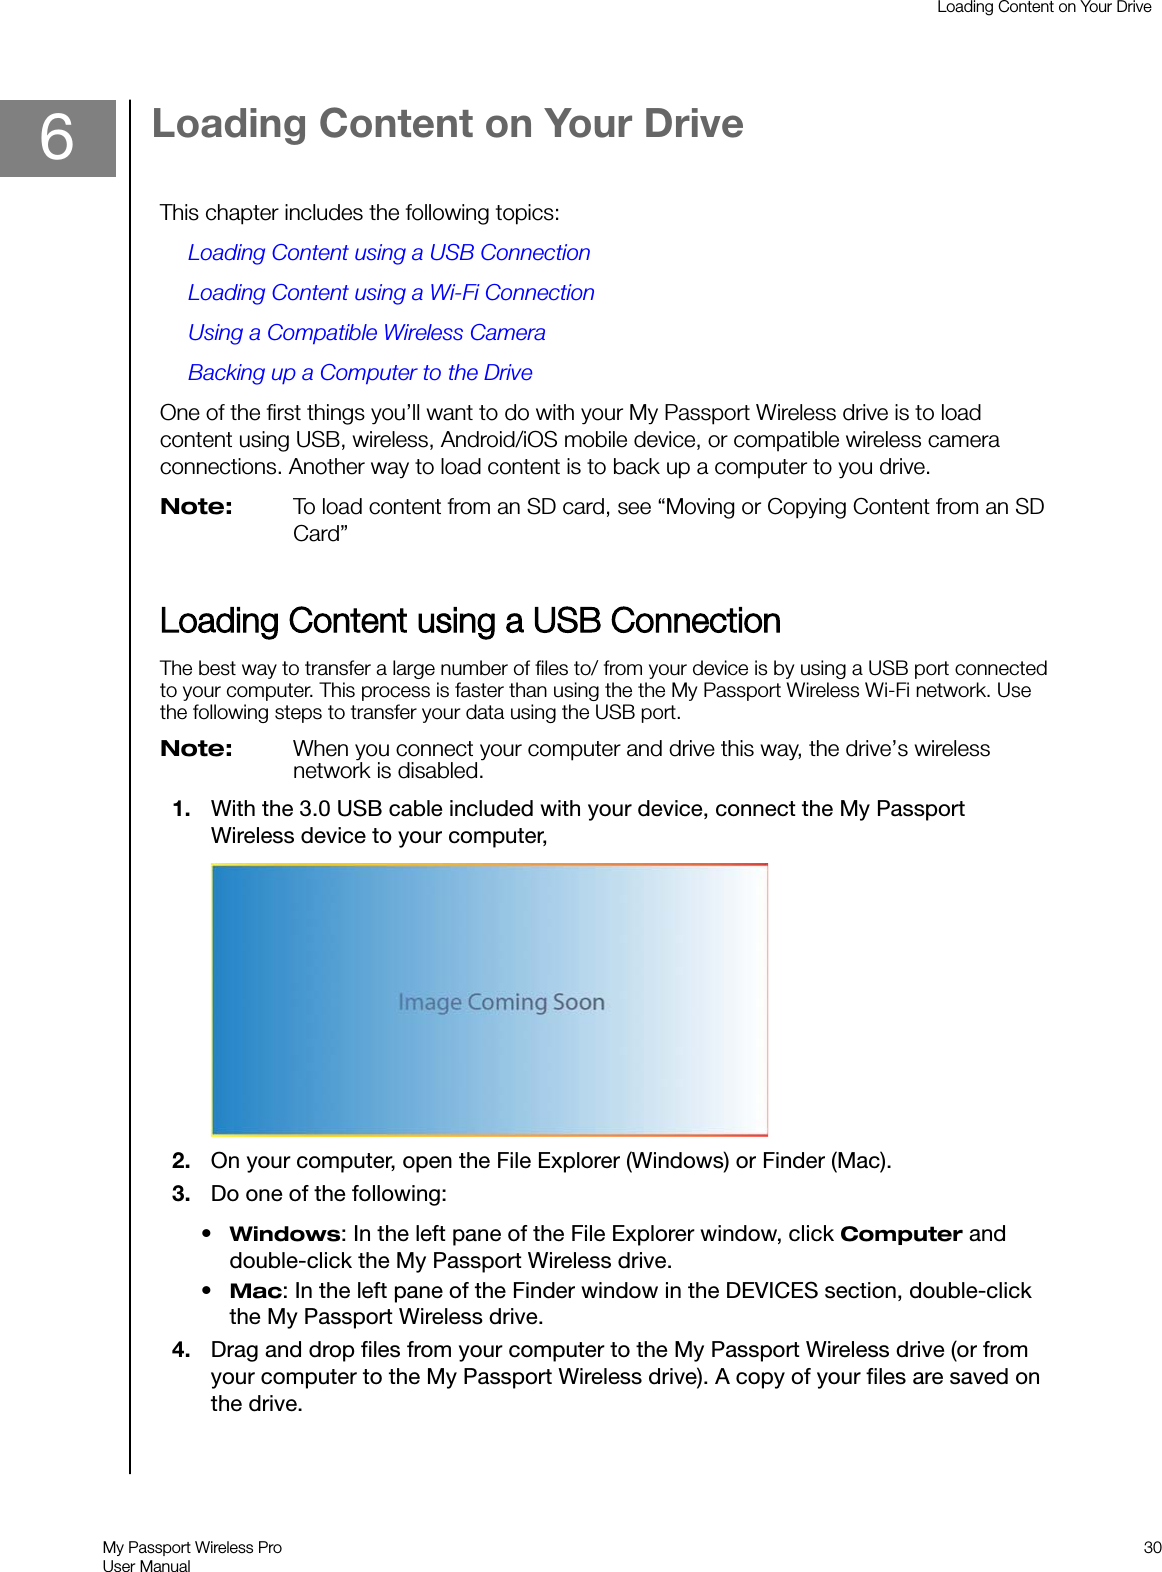 6Loading Content on Your DriveThis chapter includes the following topics:Loading Content using a USB ConnectionLoading Content using a Wi-Fi ConnectionUsing a Compatible Wireless CameraBacking up a Computer to the DriveOne of the first things you’ll want to do with your My Passport Wireless drive is to loadcontent using USB, wireless, Android/iOS mobile device, or compatible wireless cameraconnections. Another way to load content is to back up a computer to you drive.Note: To load content from an SD card, see “Moving or Copying Content from an SDCard”LLoading Content using a USB ConnectionThe best way to transfer a large number of files to/ from your device is by using a USB port connectedto your computer. This process is faster than using the the My Passport Wireless Wi-Fi network. Usethe following steps to transfer your data using the USB port.Note: When you connect your computer and drive this way, the drive’s wirelessnetwork is disabled.1. With the 3.0 USB cable included with your device, connect the My PassportWireless device to your computer,2. On your computer, open the File Explorer (Windows) or Finder (Mac).3. Do one of the following:•Windows: In the left pane of the File Explorer window, click Computer anddouble-click the My Passport Wireless drive.•Mac: In the left pane of the Finder window in the DEVICES section, double-clickthe My Passport Wireless drive.4. Drag and drop files from your computer to the My Passport Wireless drive (or fromyour computer to the My Passport Wireless drive). A copy of your files are saved onthe drive.Loading Content on Your DriveMy Passport Wireless ProUser Manual30